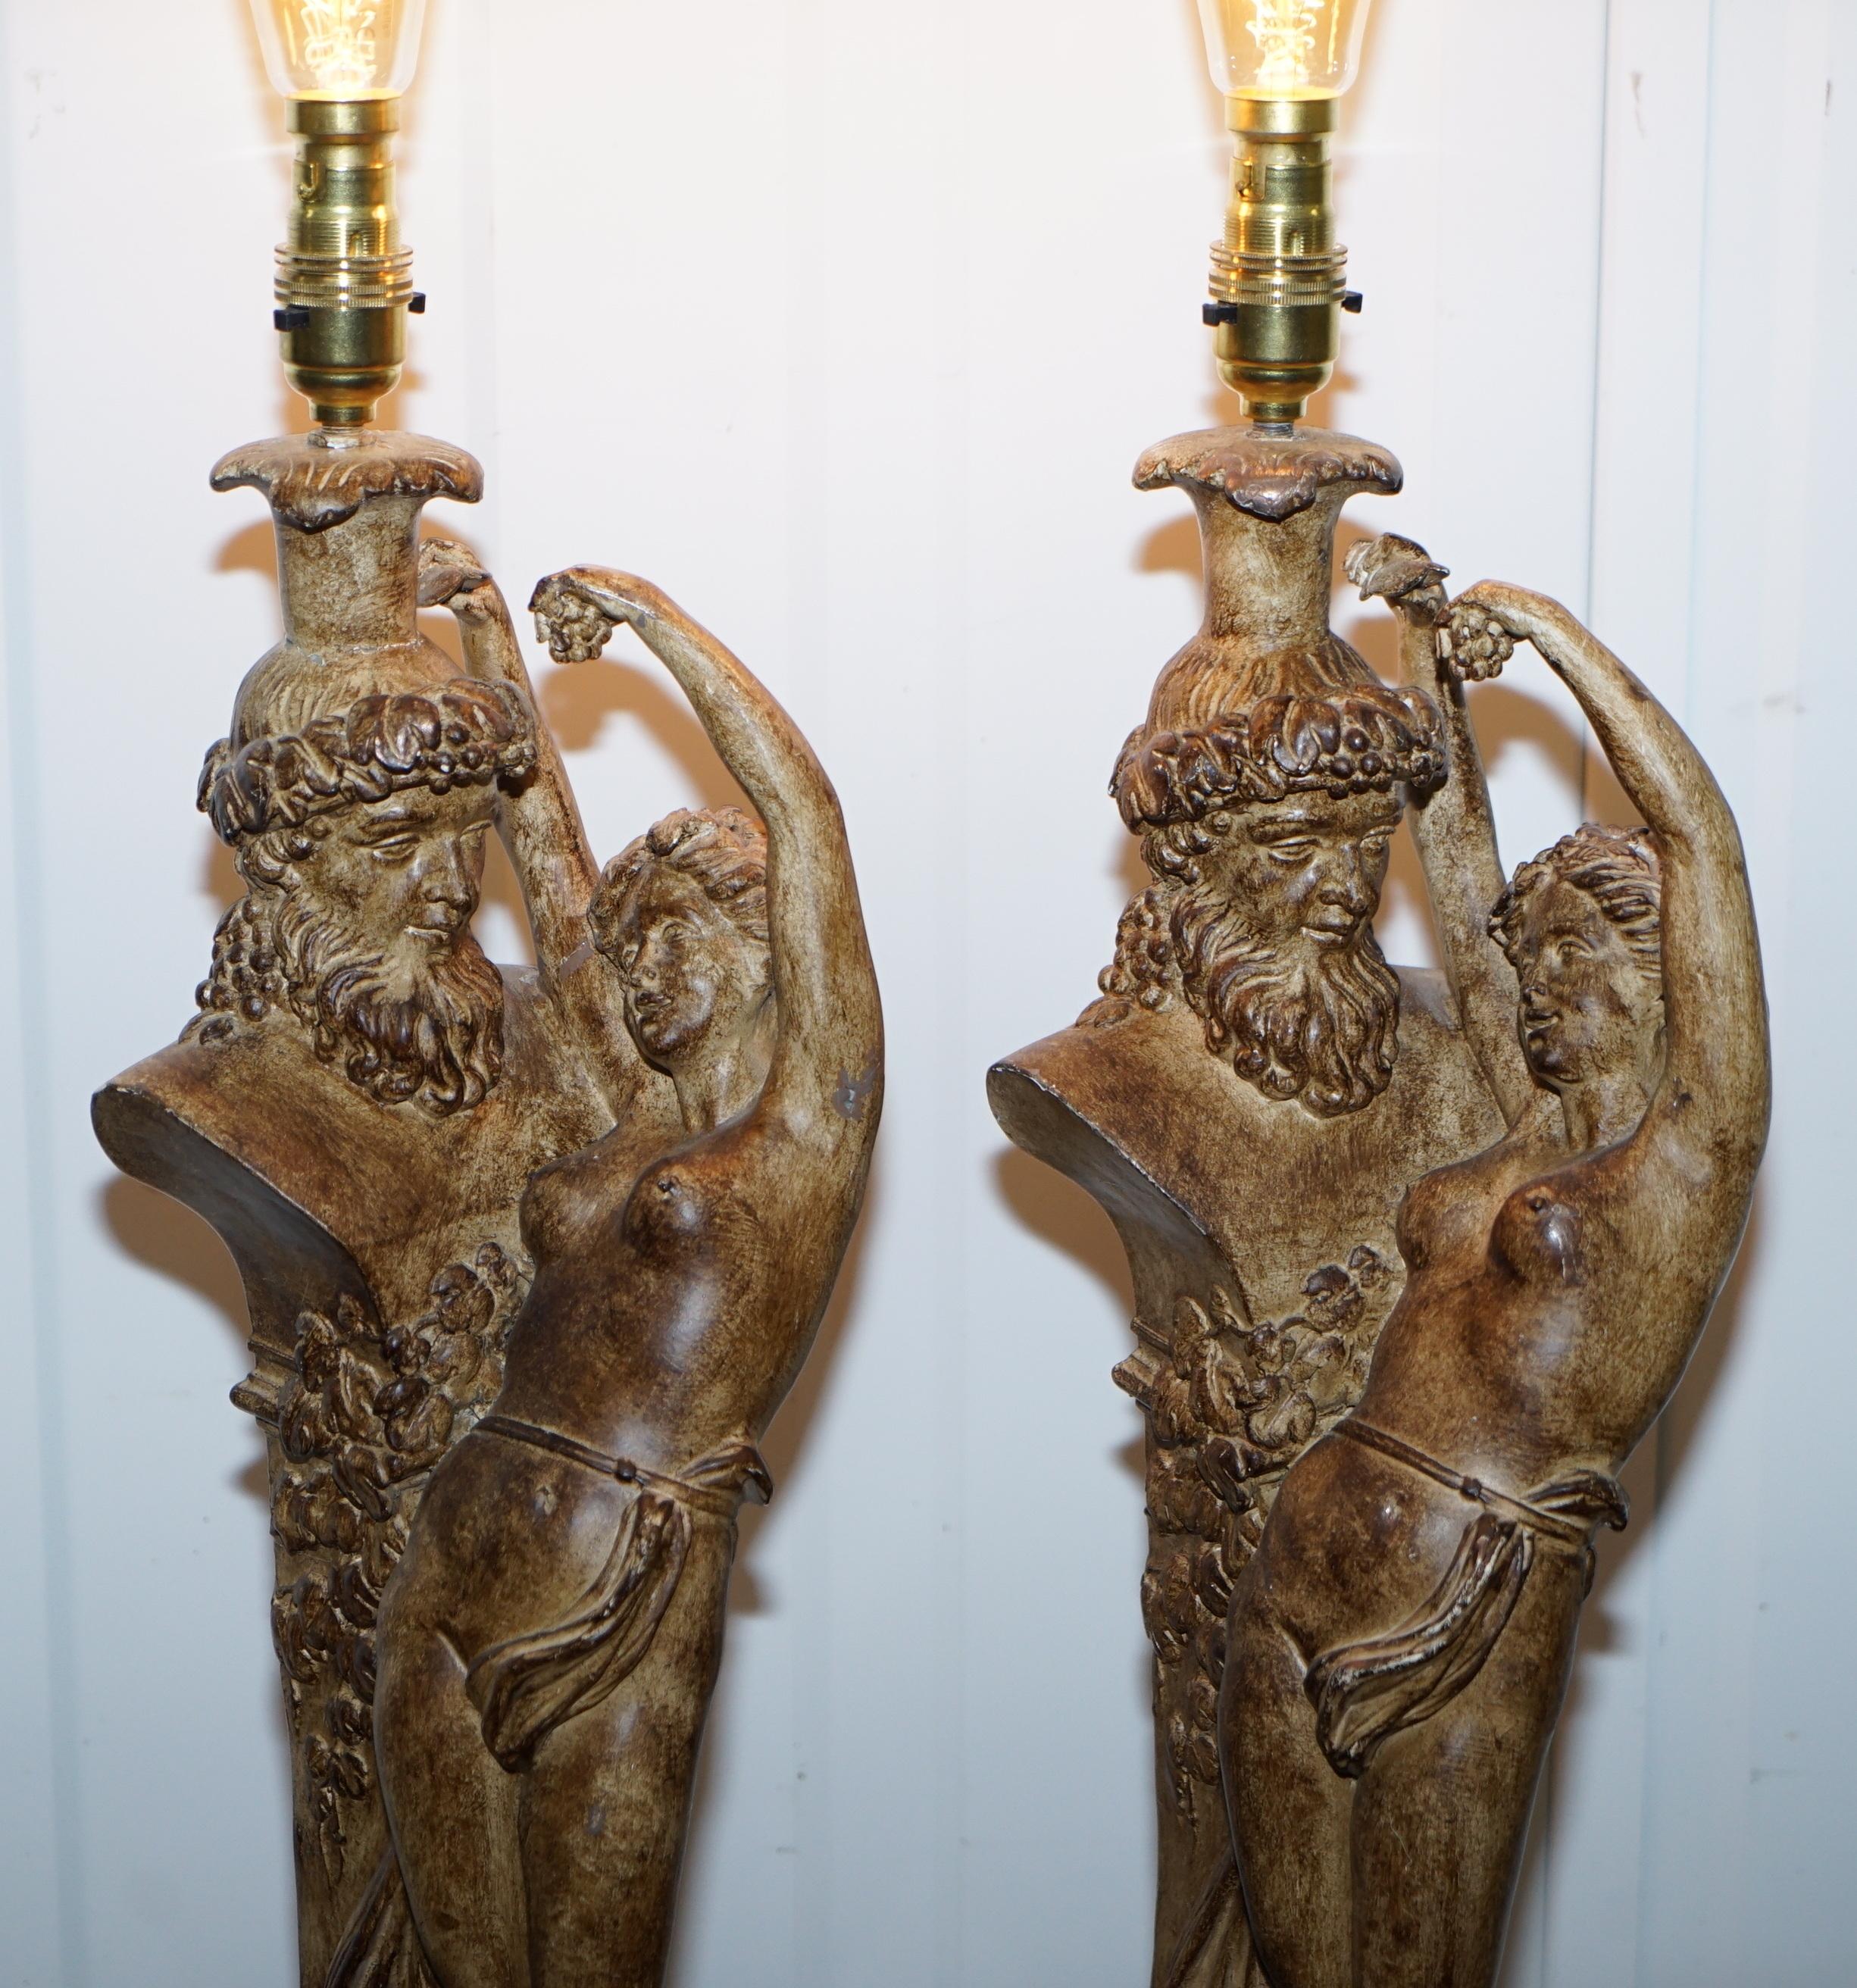 We are delighted to this very decorative pair of Roman style table lamps

A good looking pair, they each depict a maiden who looks to be seducing a statue of Zeus god of thunder 

The lamps have been fully restored with new three core flex